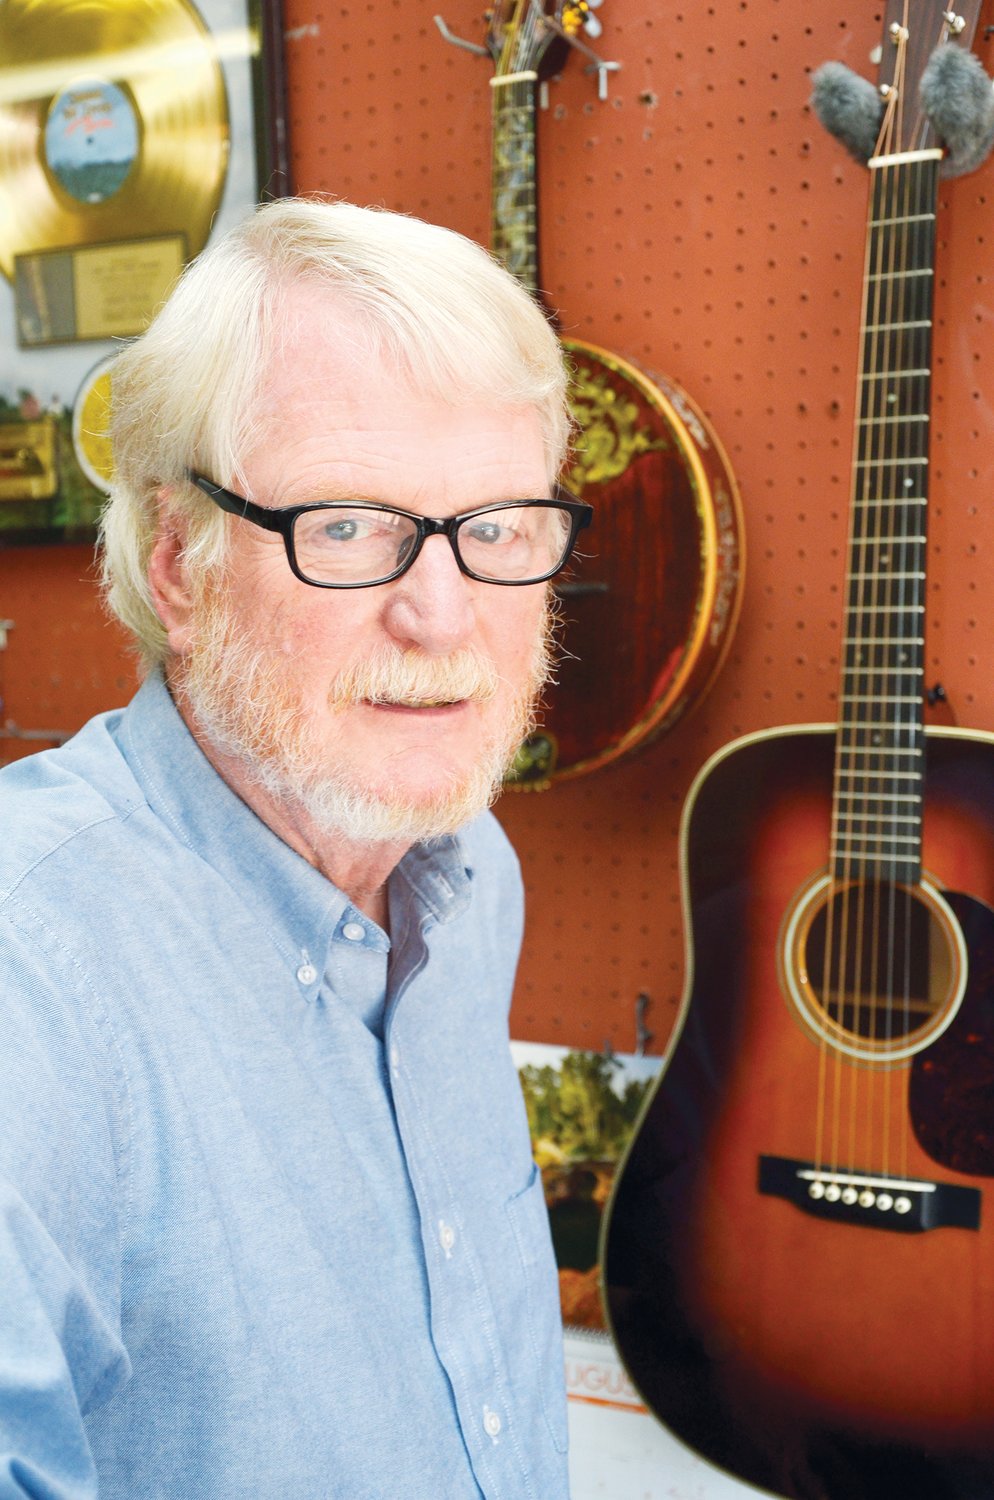 Tommy Edwards sells a variety of products in his antique store, but he loves to play music. His favorite style is bluegrass, and he plays in a variety of bands throughout the Carolinas.